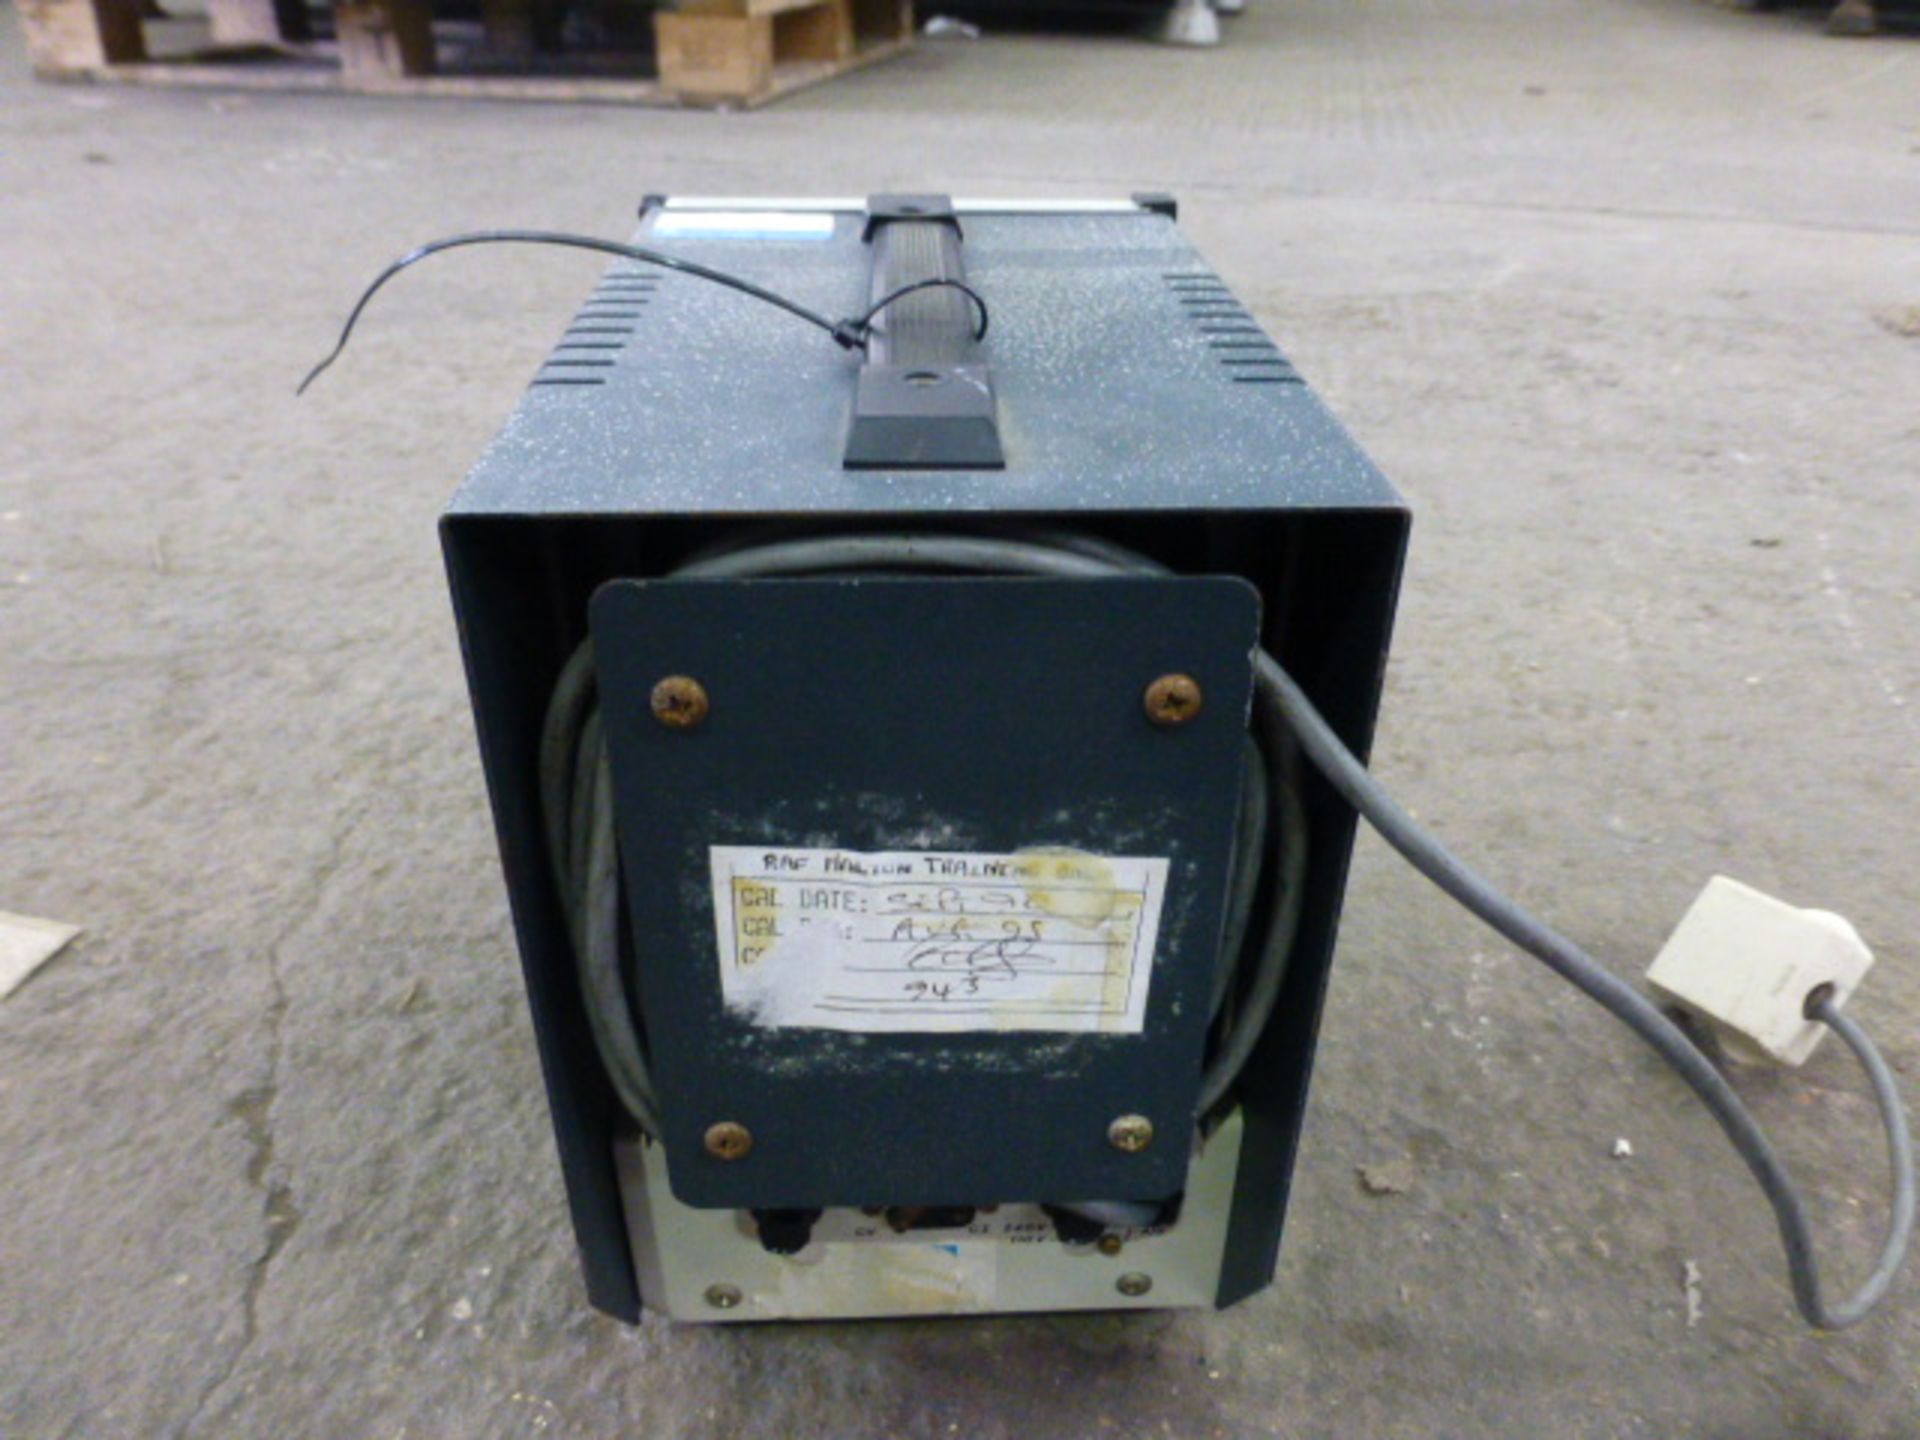 Farnell L30/1 Stabilised Power Supply - Image 5 of 5